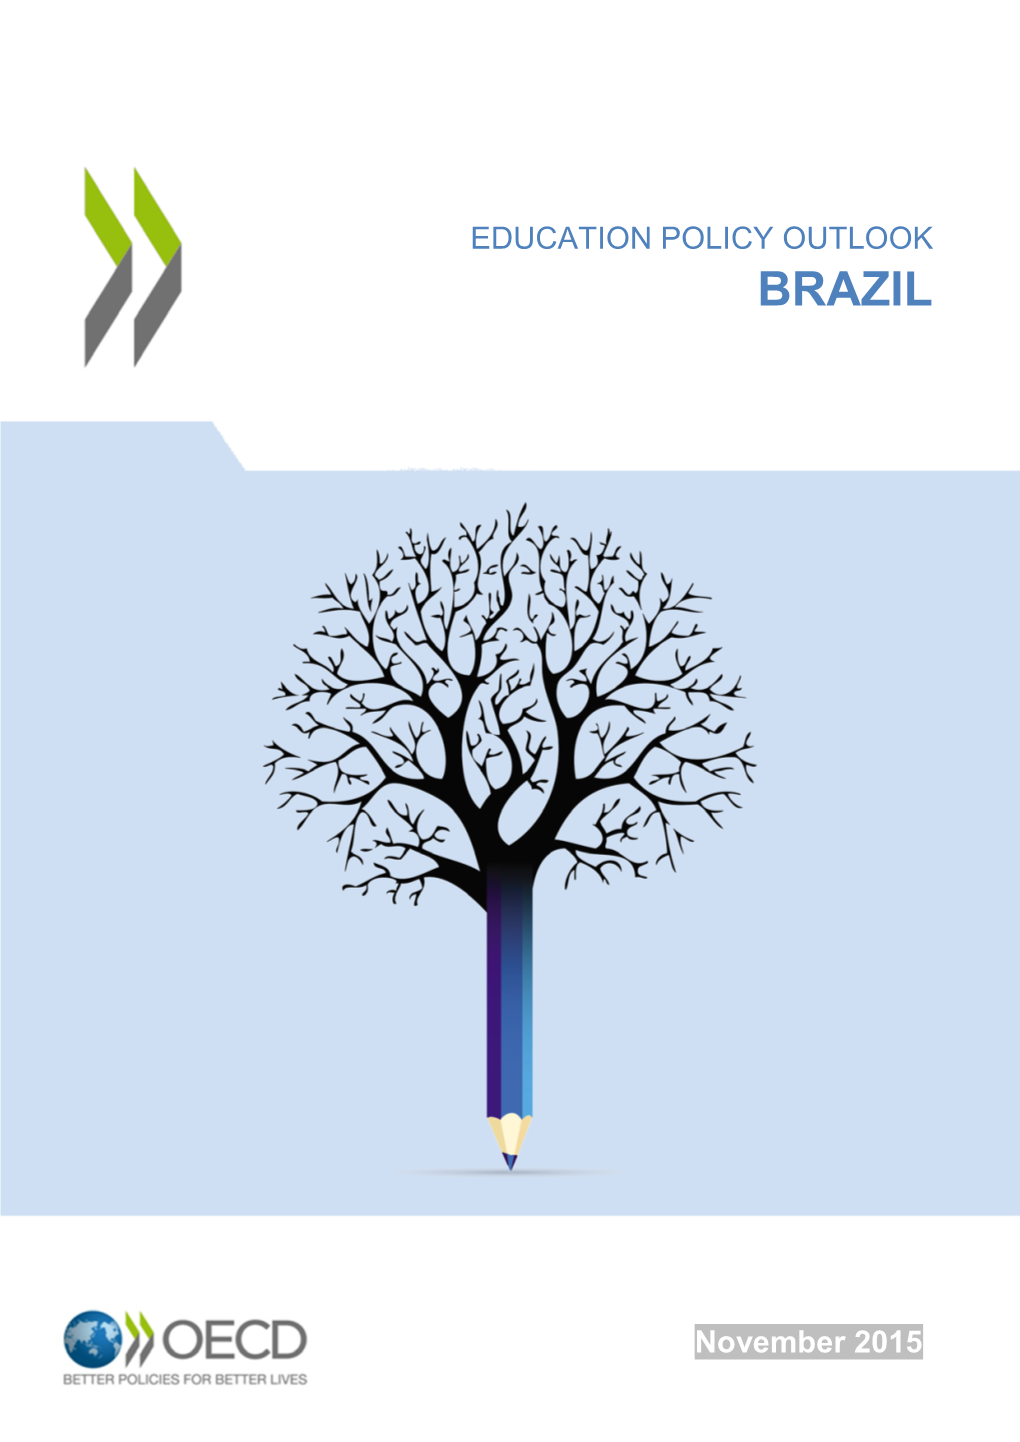 OECD Education Policy Outlook: Brazil